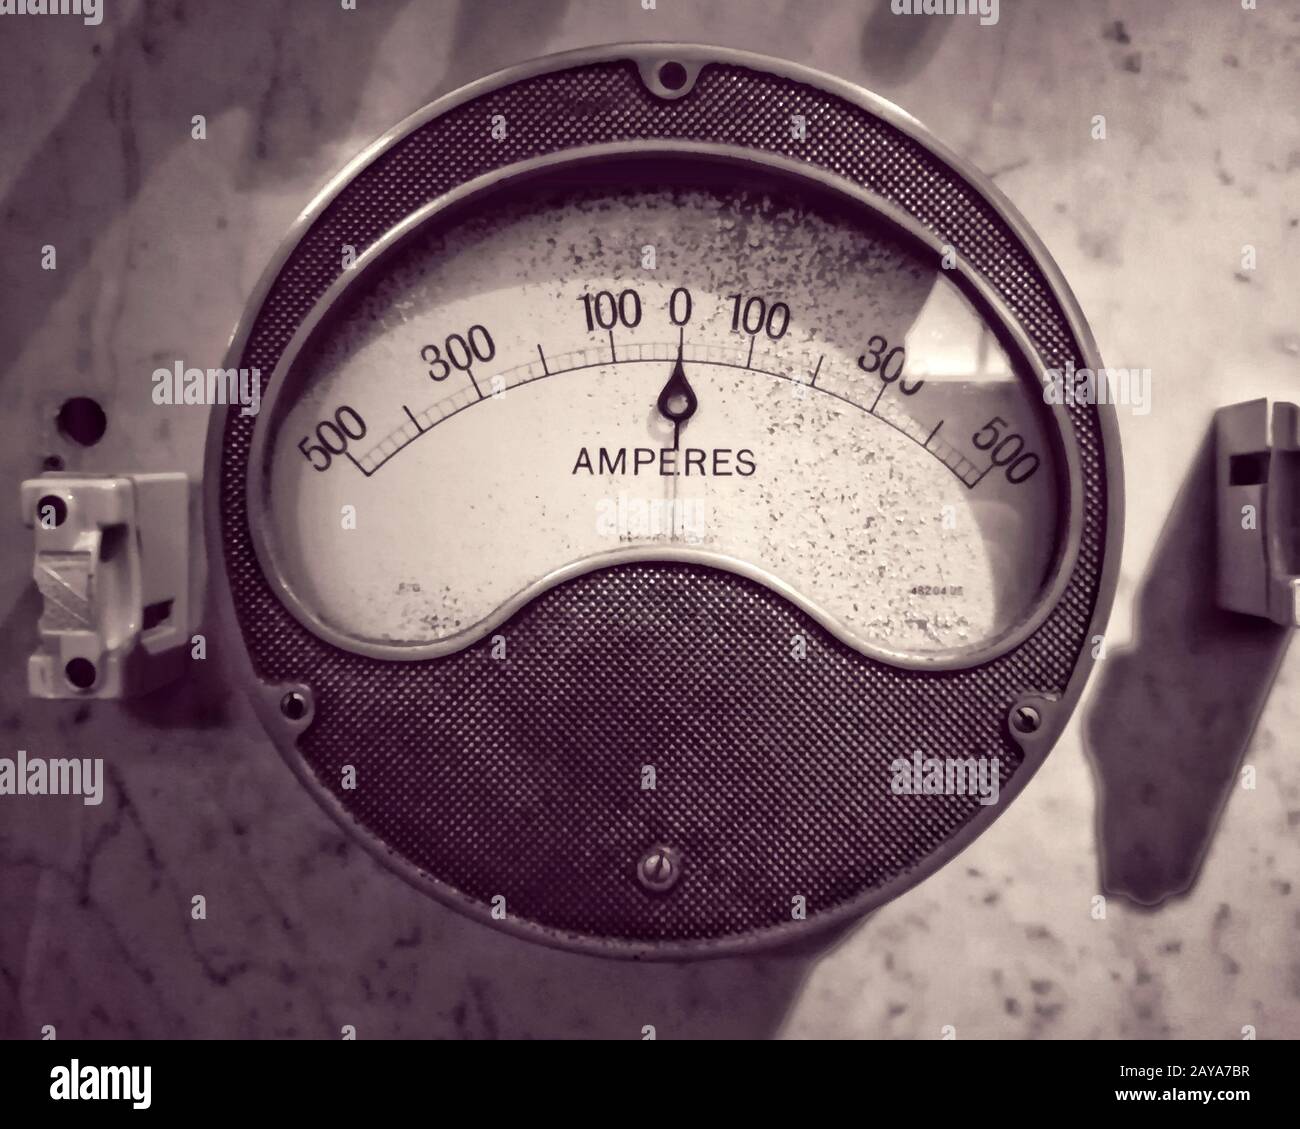 monochrome image of an old round metal industrial ammeter with an analogue dial and scale Stock Photo